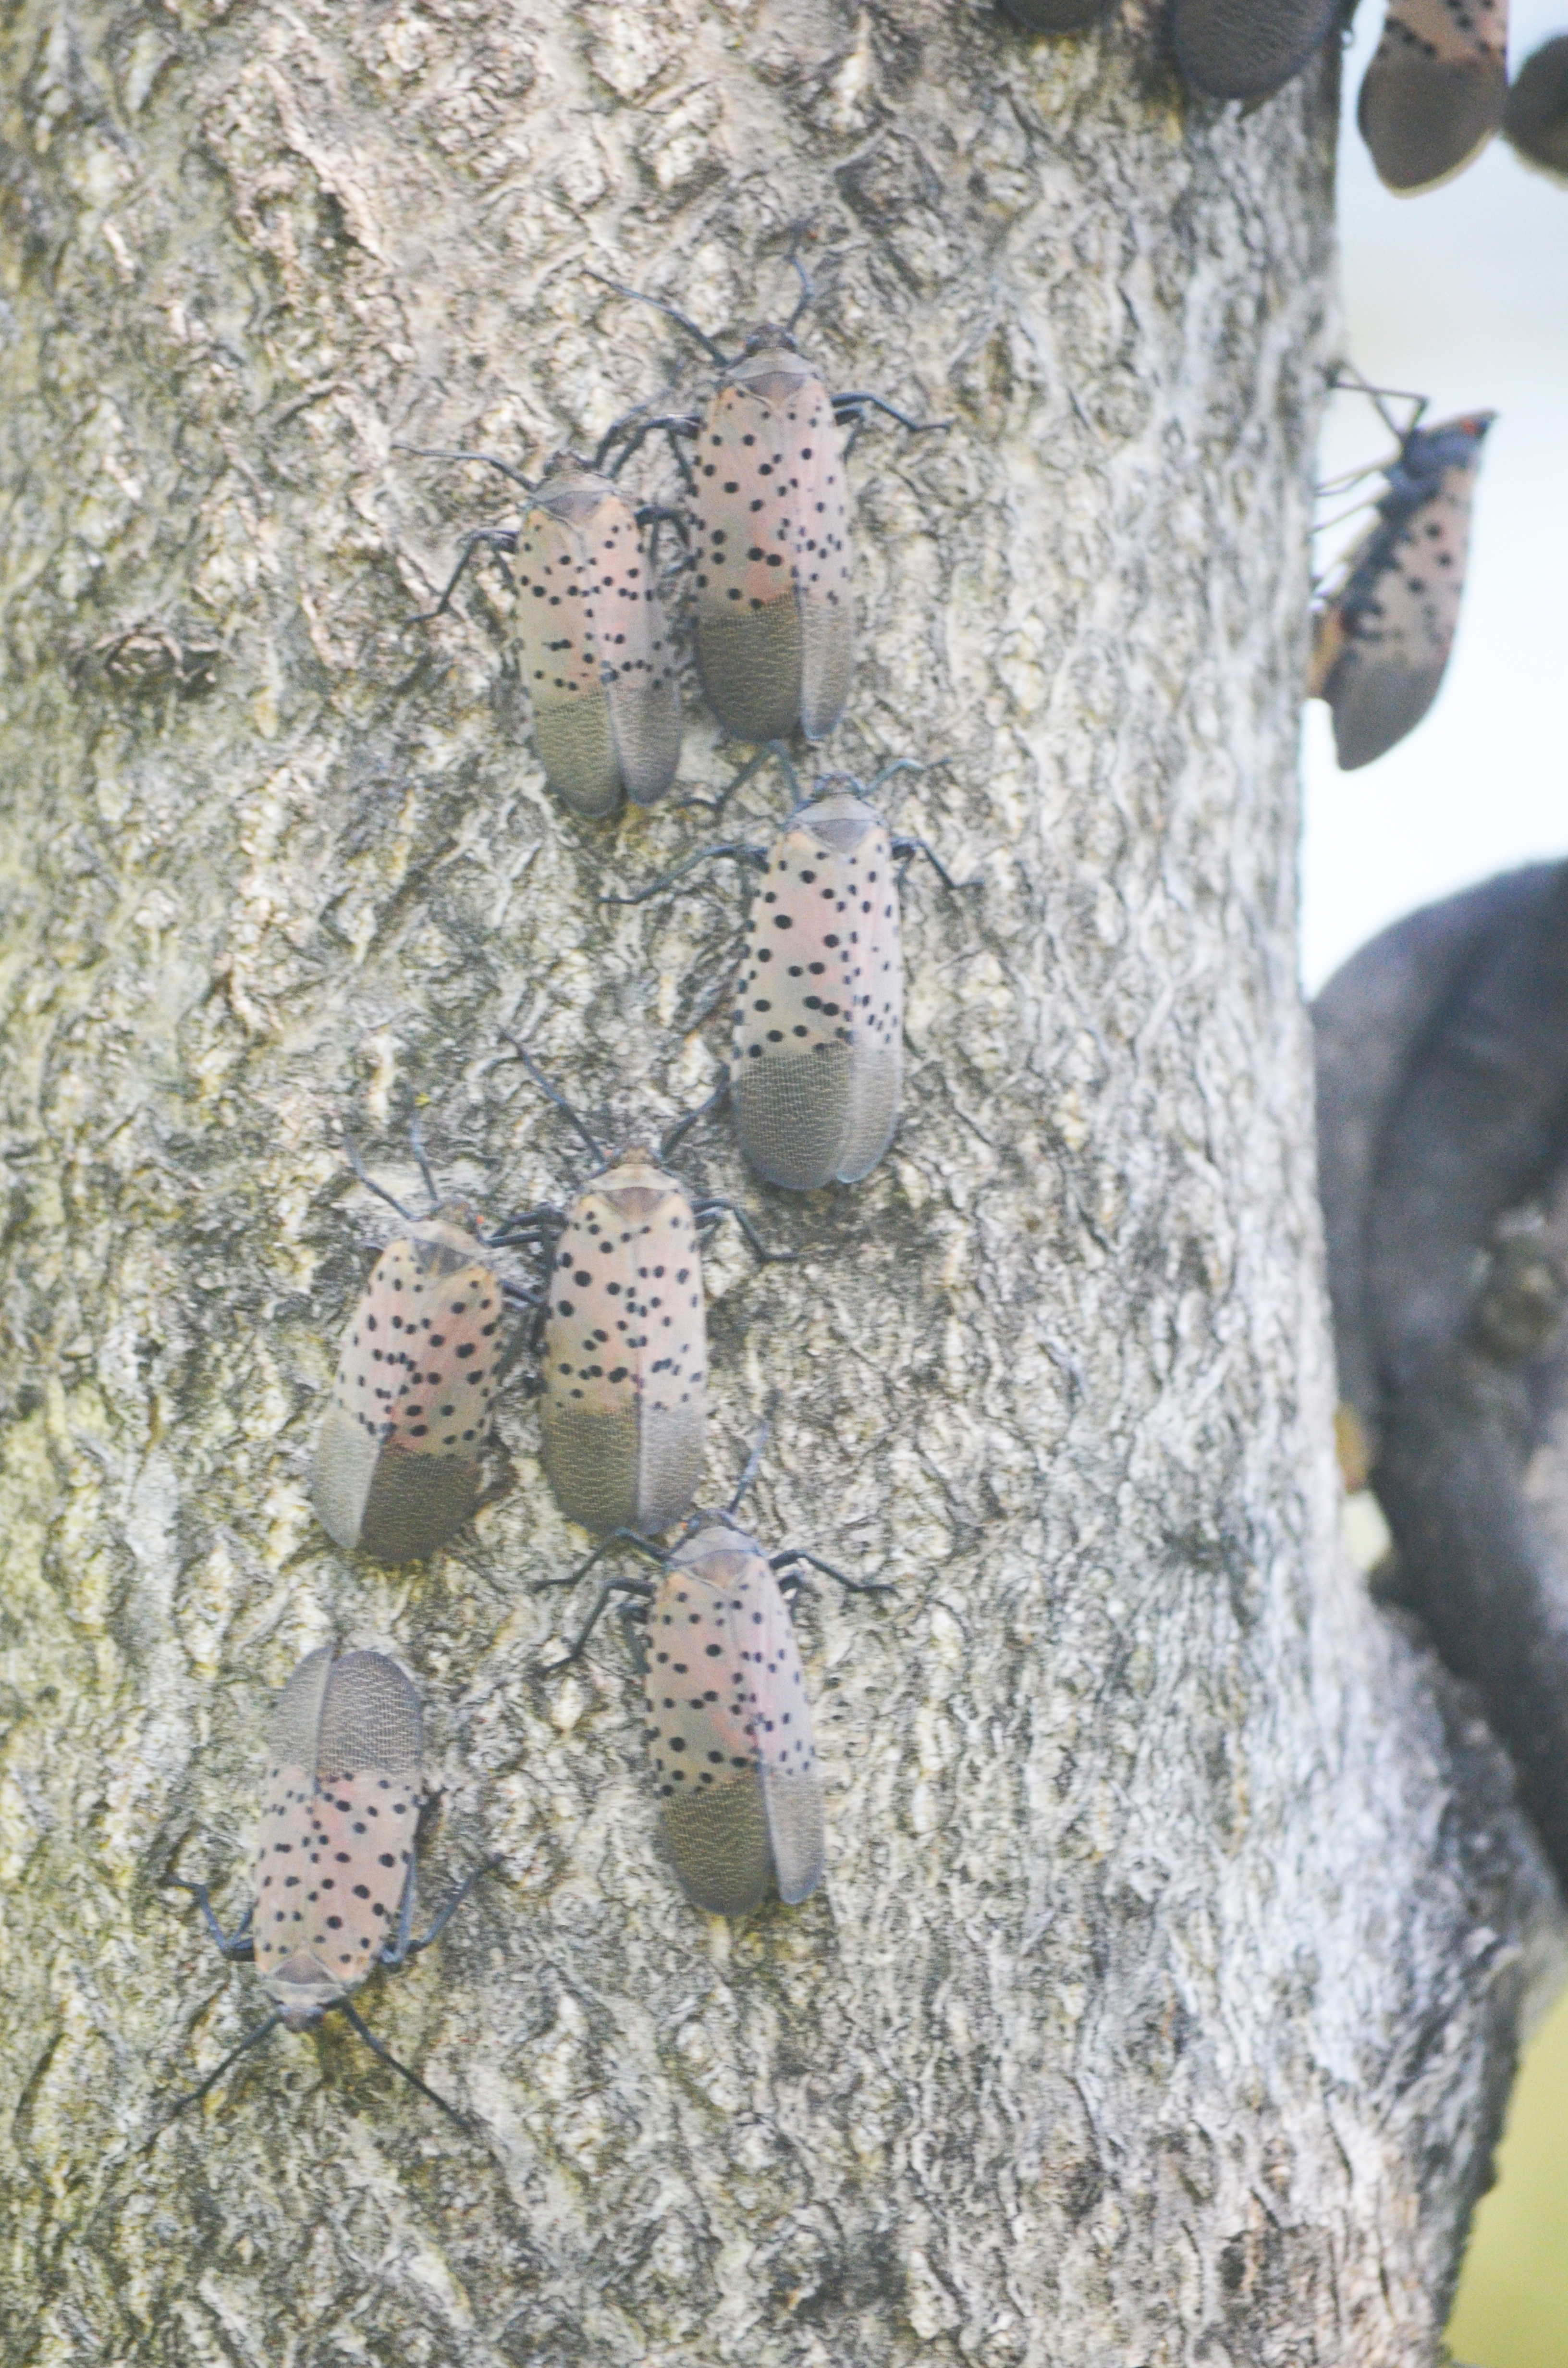 Spotted Lanternfly - Click to enlarge